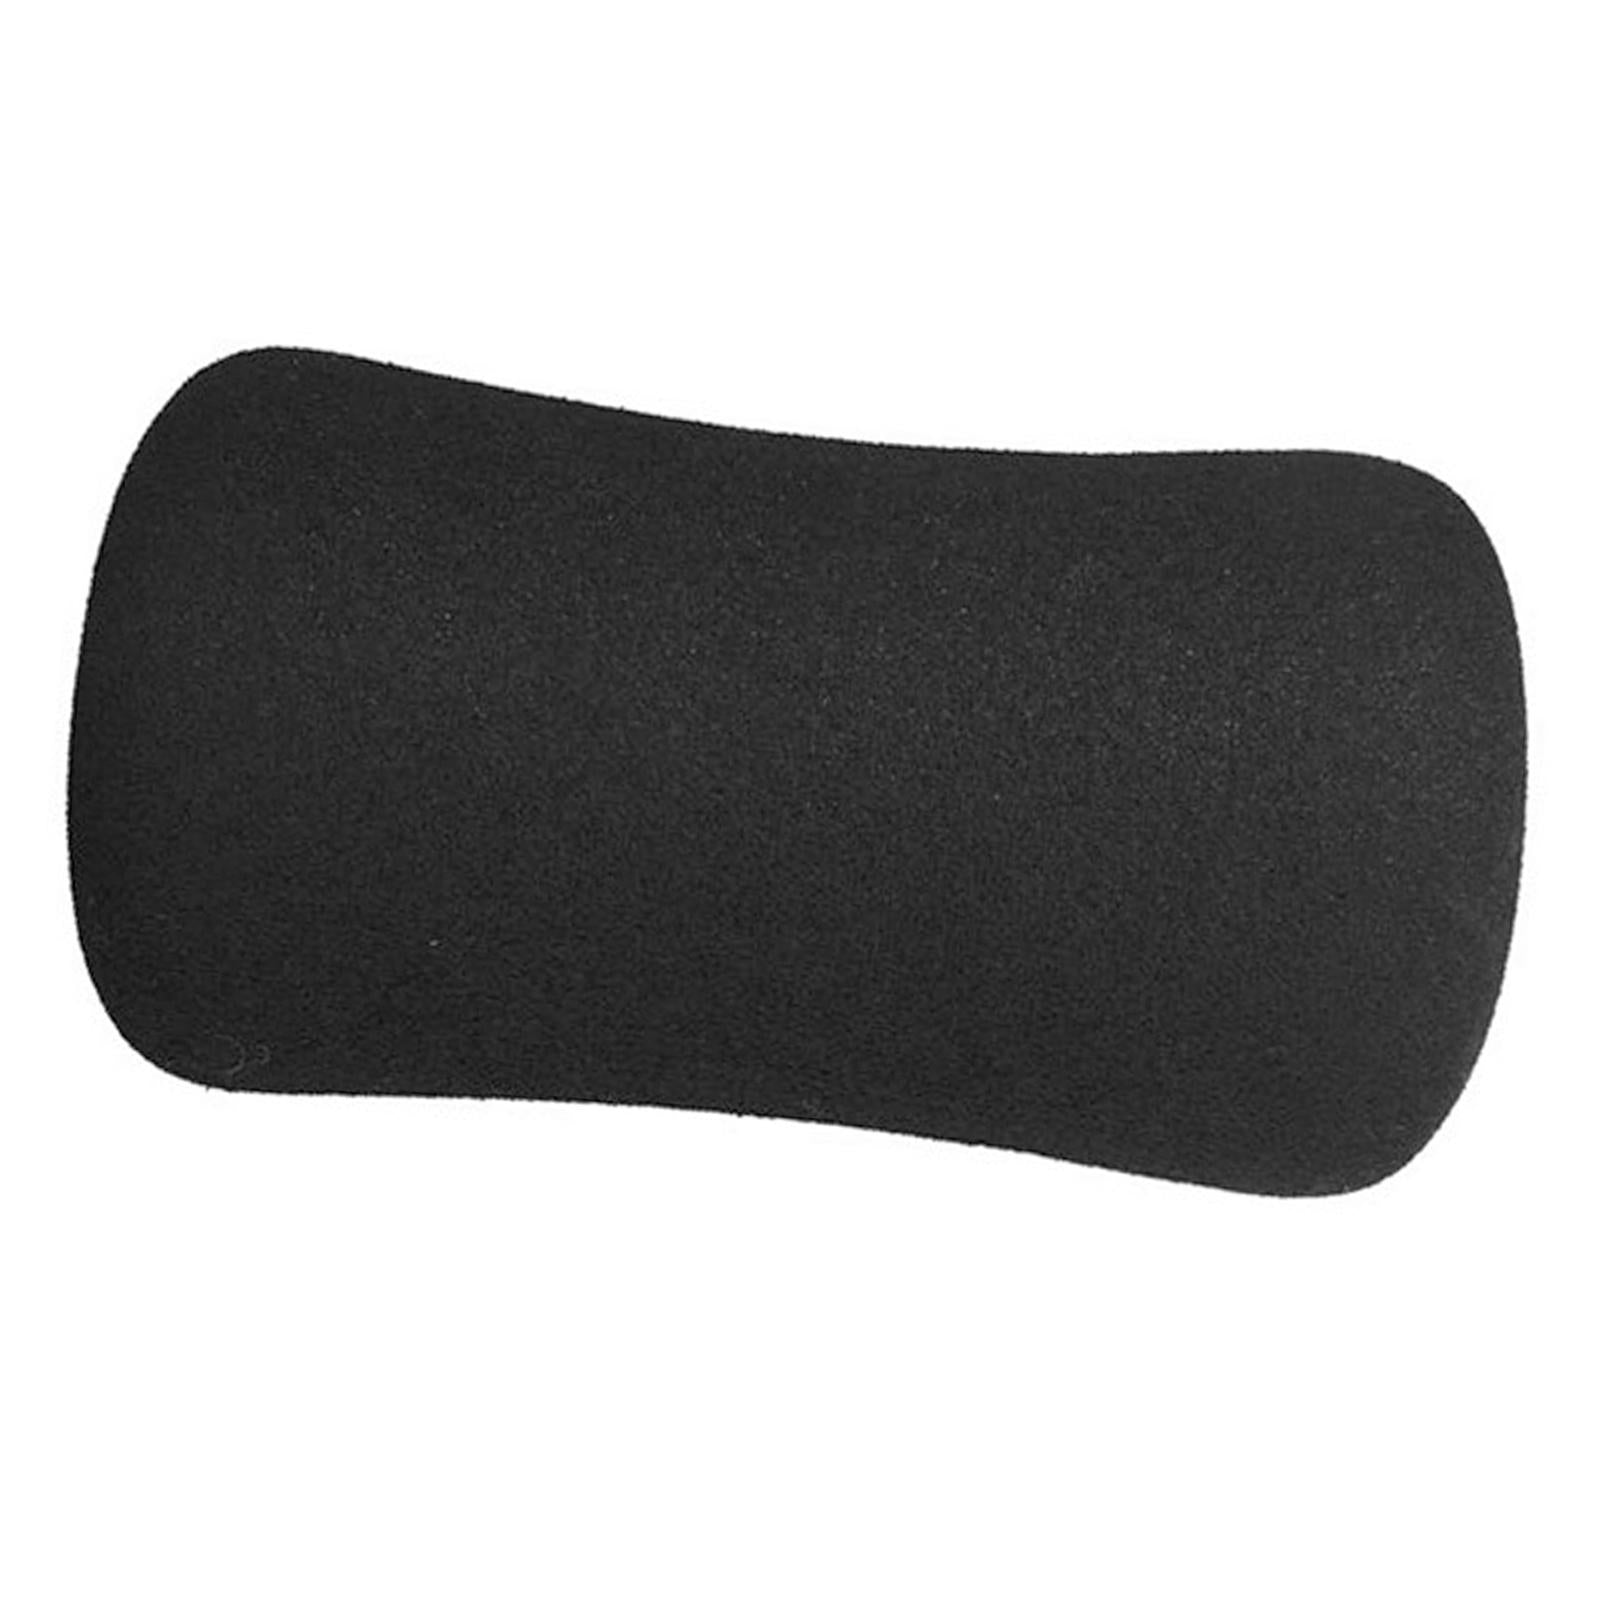 1 Pack Foam Grips for Home Gym Sit up Bar Machines Exercise Core Strength 13.5cm